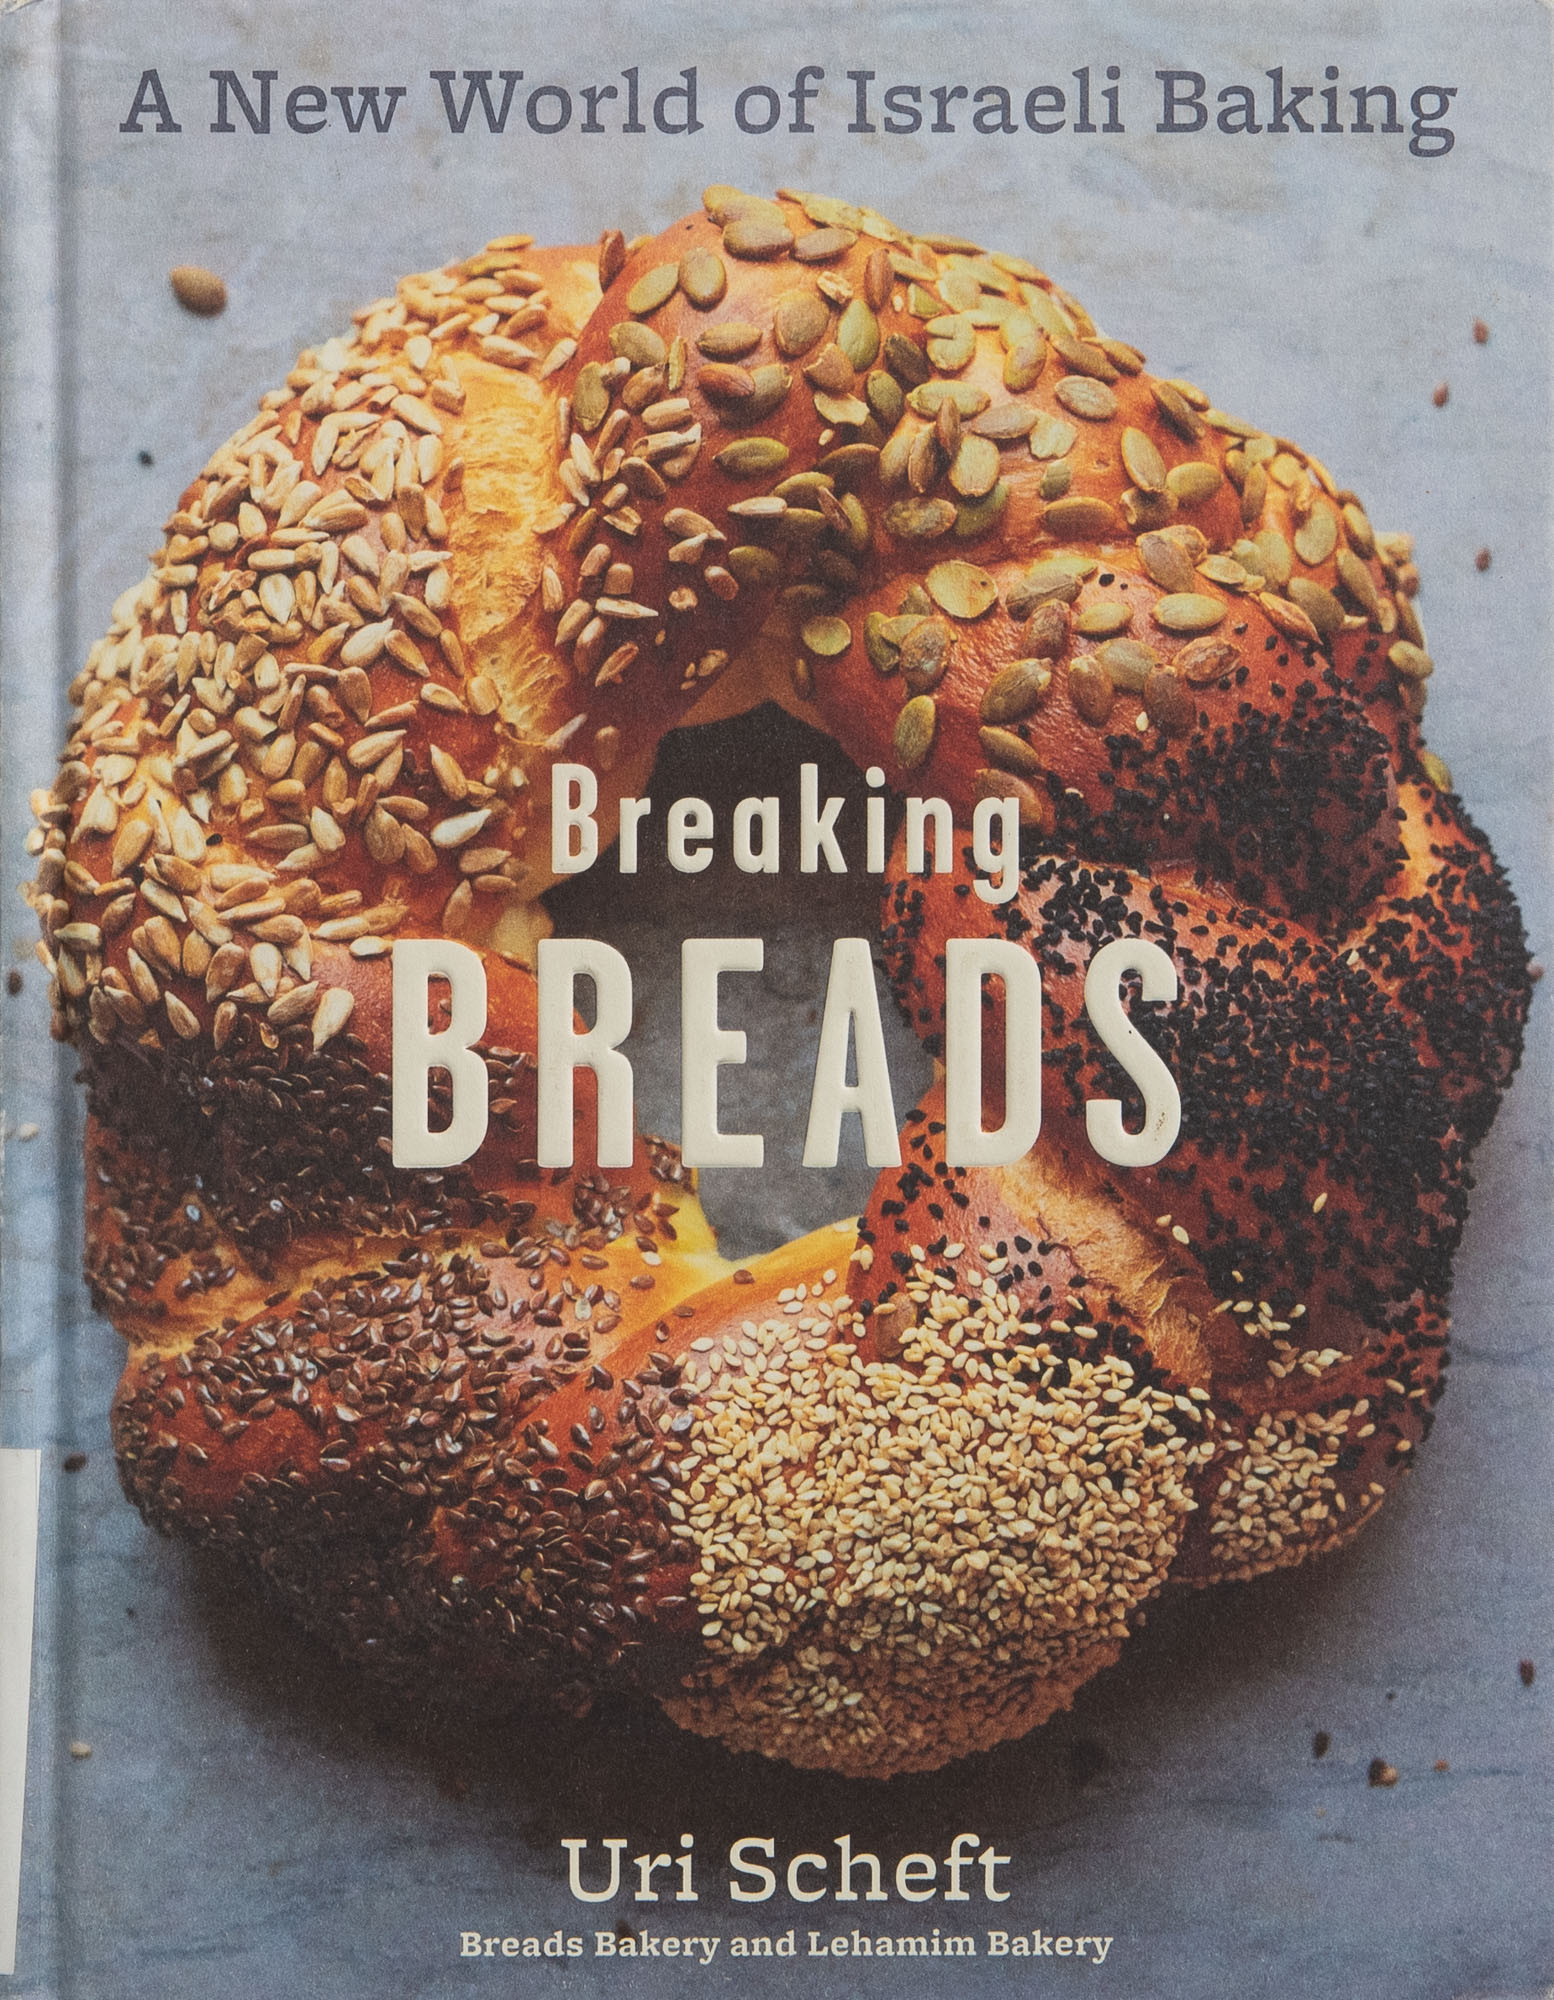 The cover of the cookbook Breaking Breads: A New World of Israeli Baking